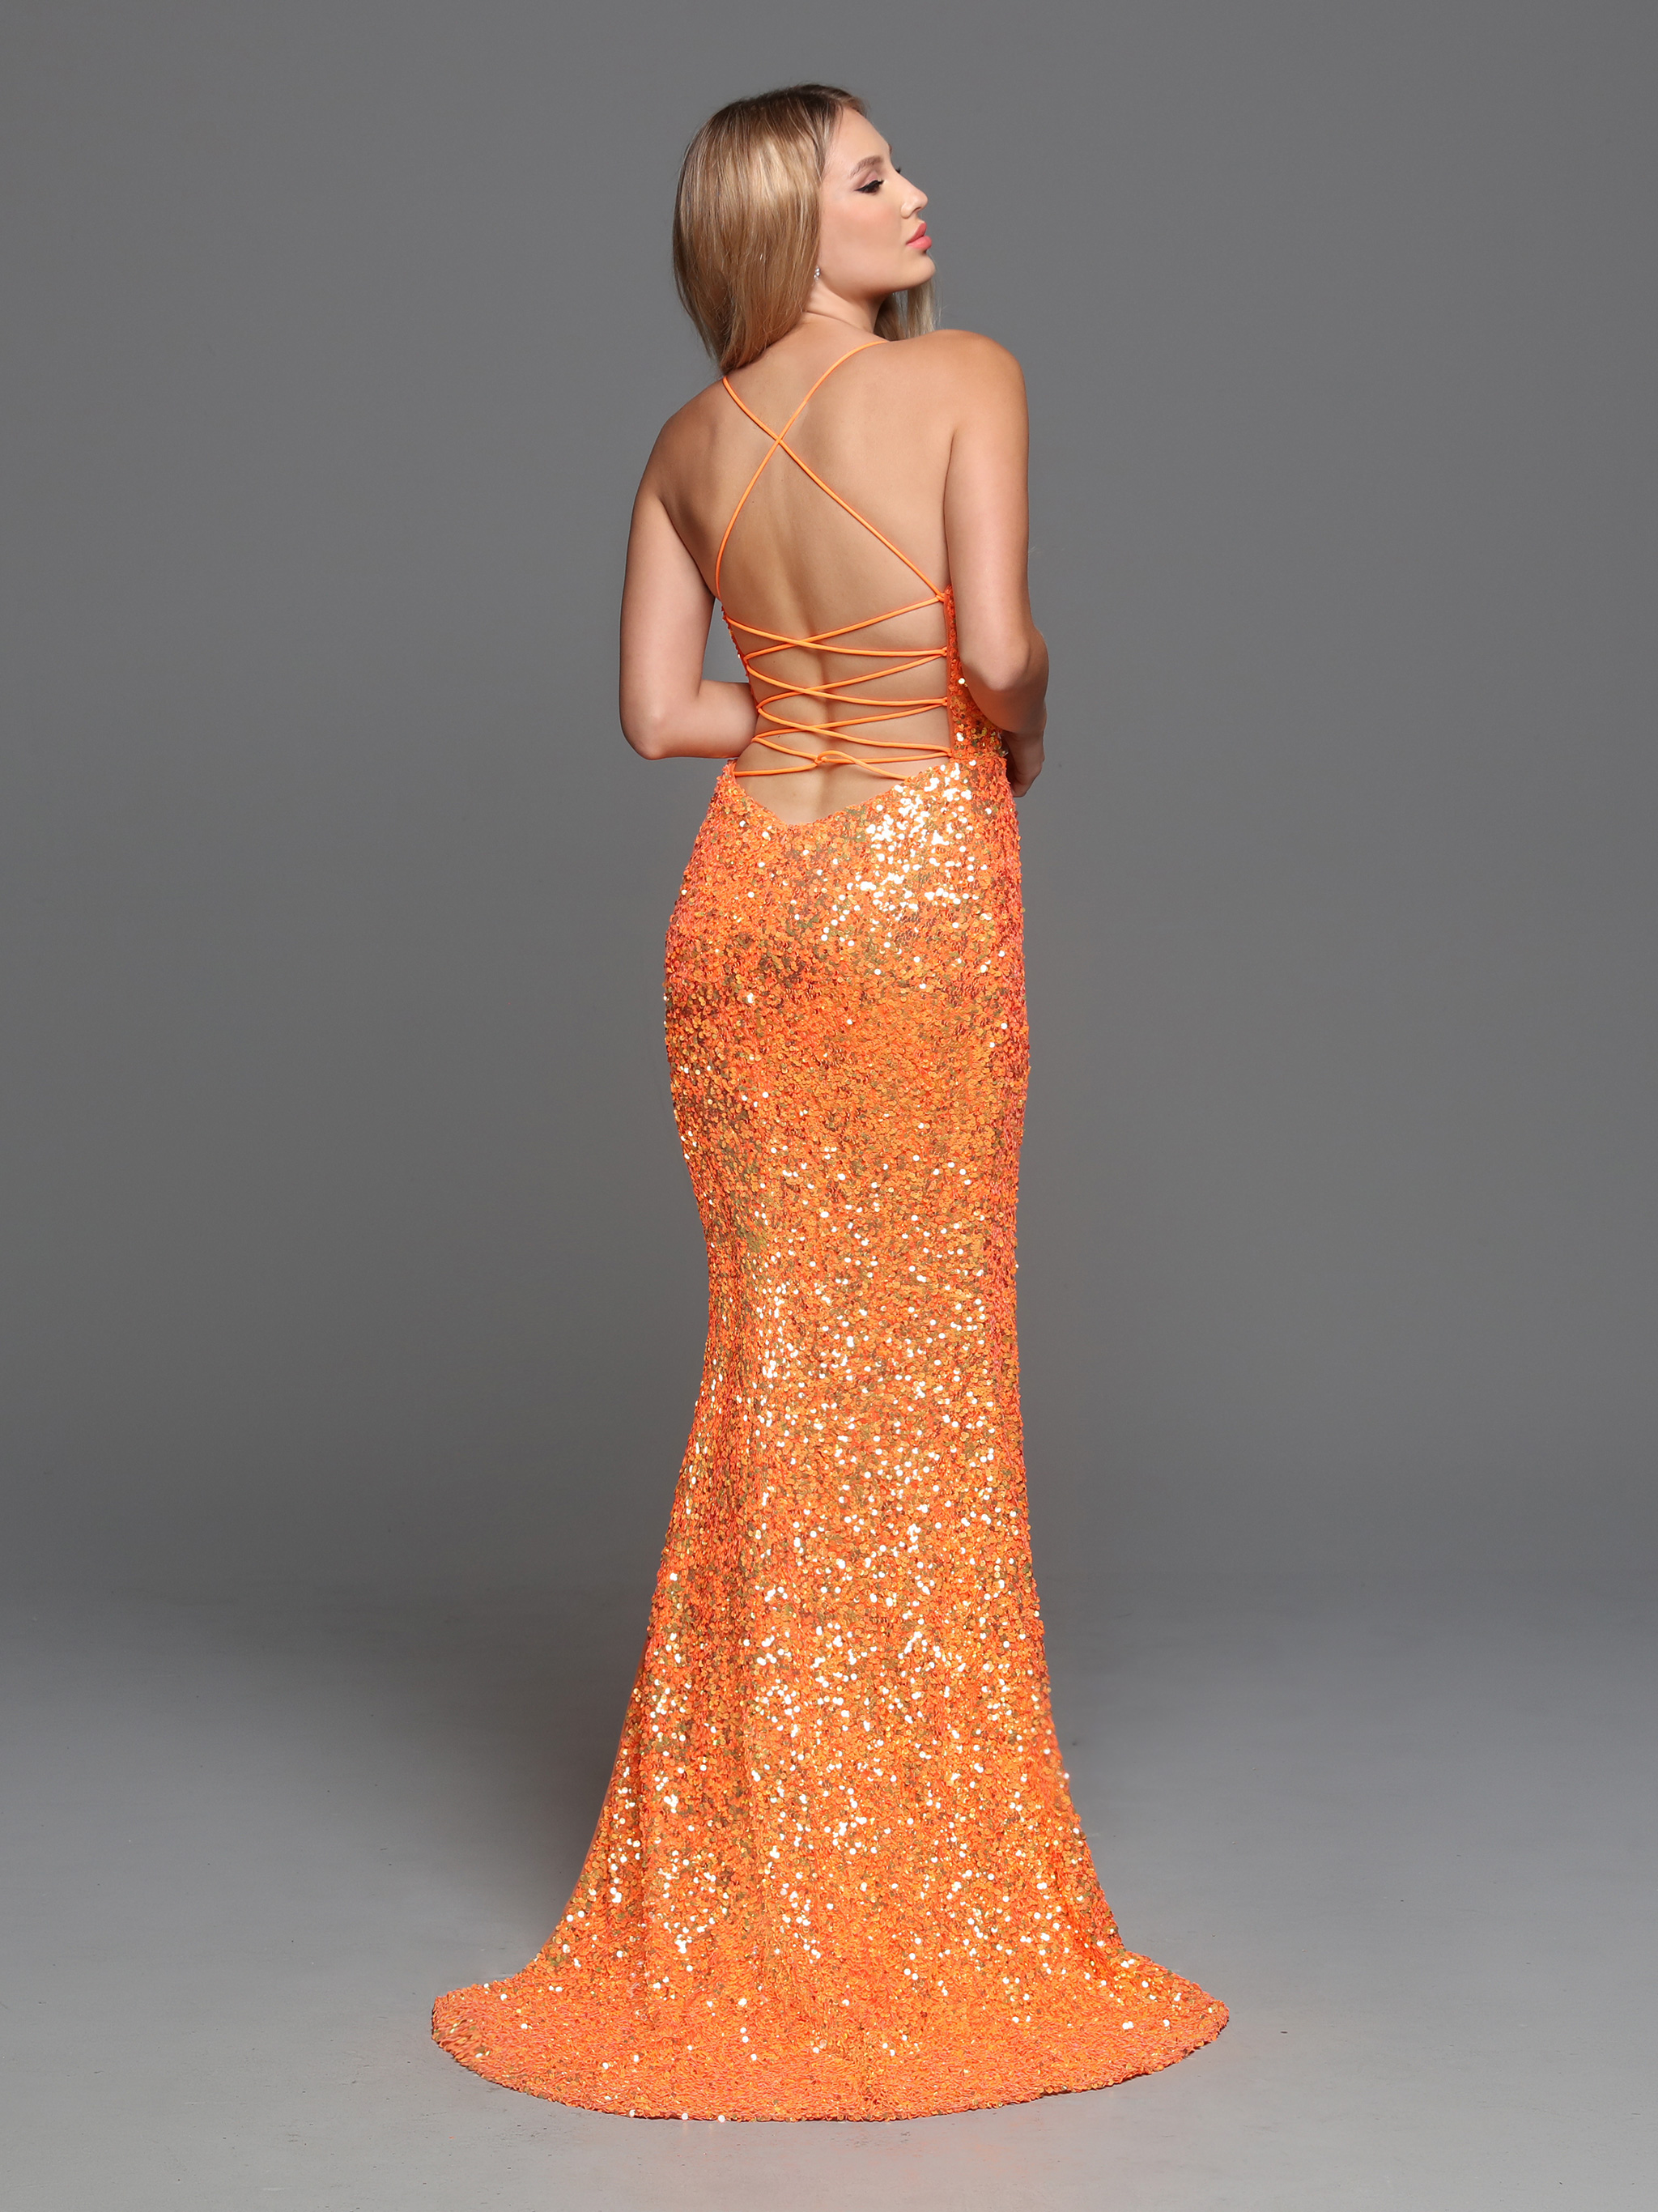 Image showing back view of style #72235